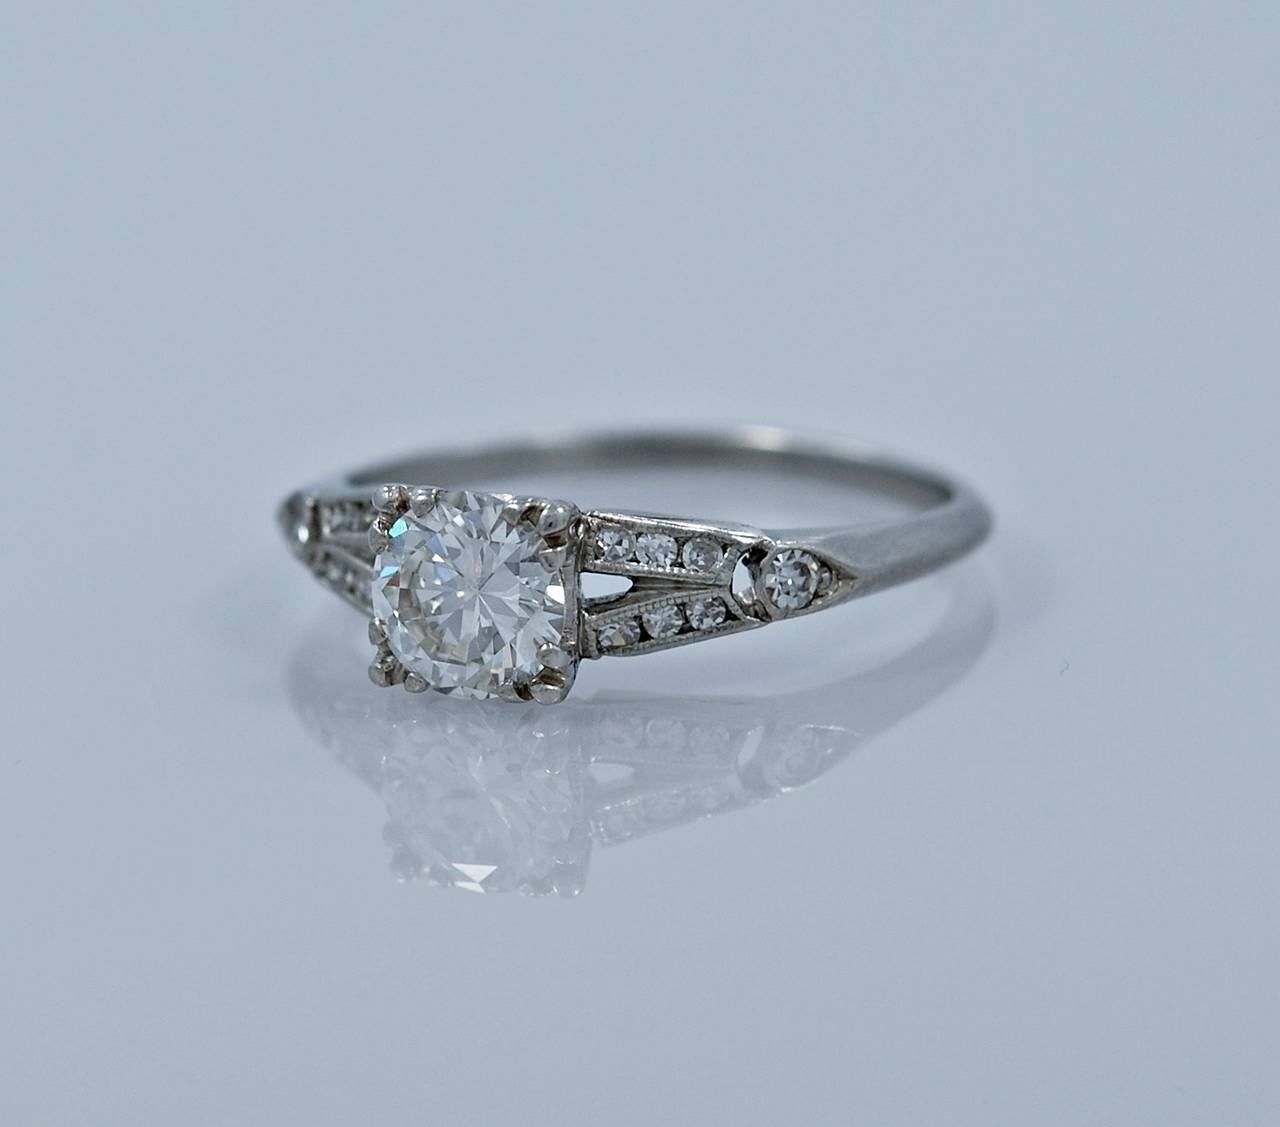 J34575

REASONABLE OFFERS CONSIDERED!

A gorgeous platinum Art Deco engagement ring featuring a .60ct. apx. round transitional diamond with accompanying .10ct. apx. T.W. of diamond melee in carved 